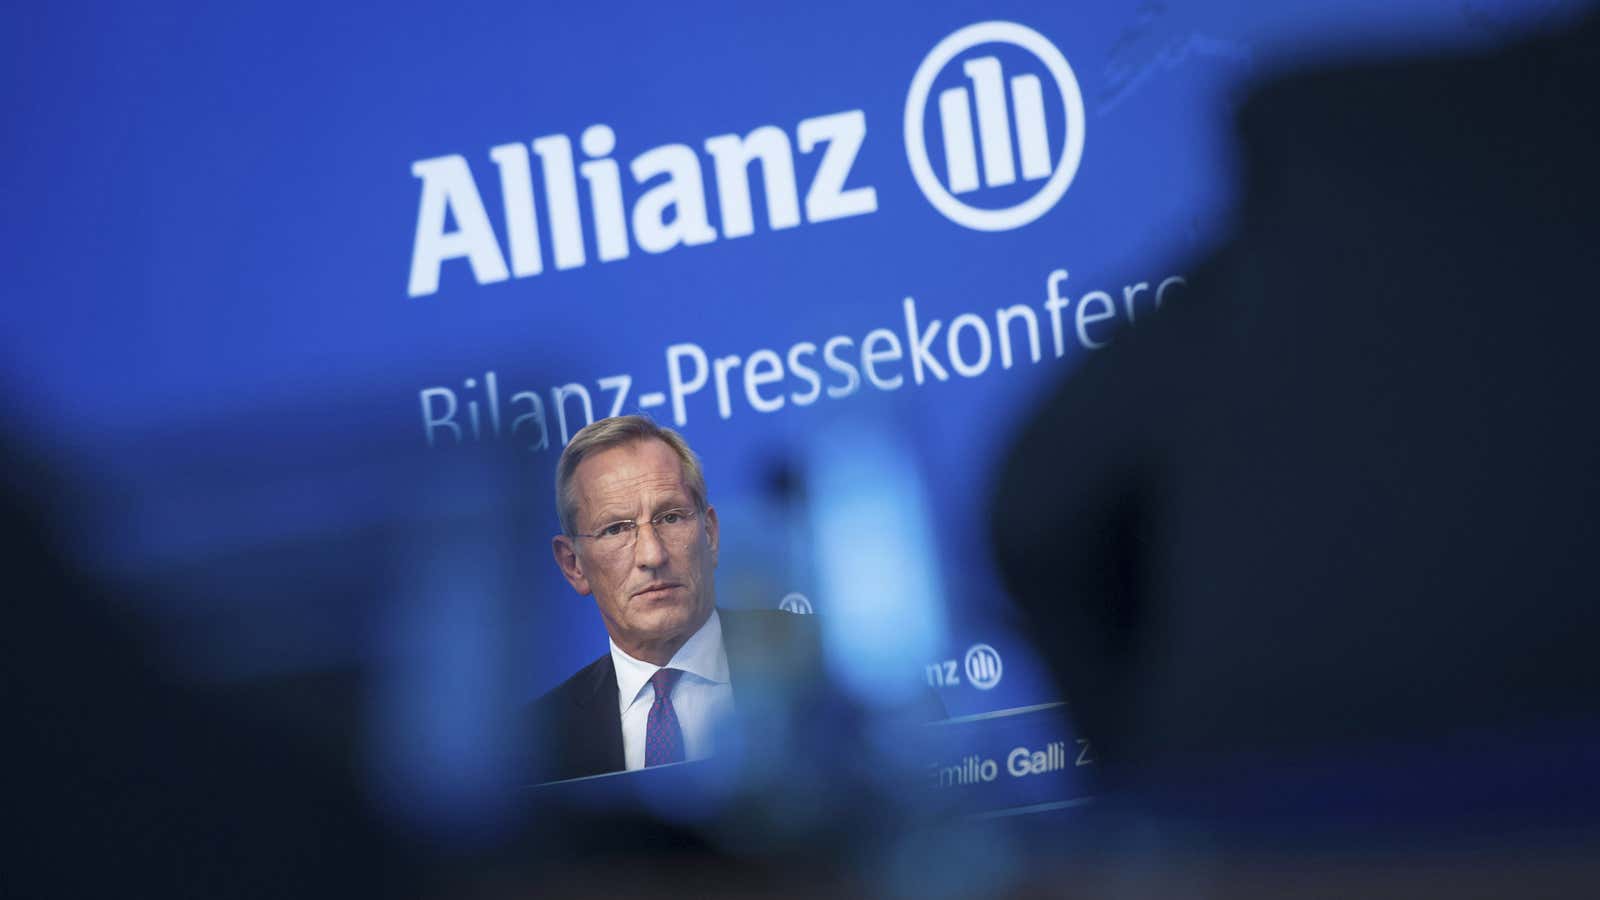 Allianz CEO Michael Diekmann touched briefly on the situation in Newport Beach.